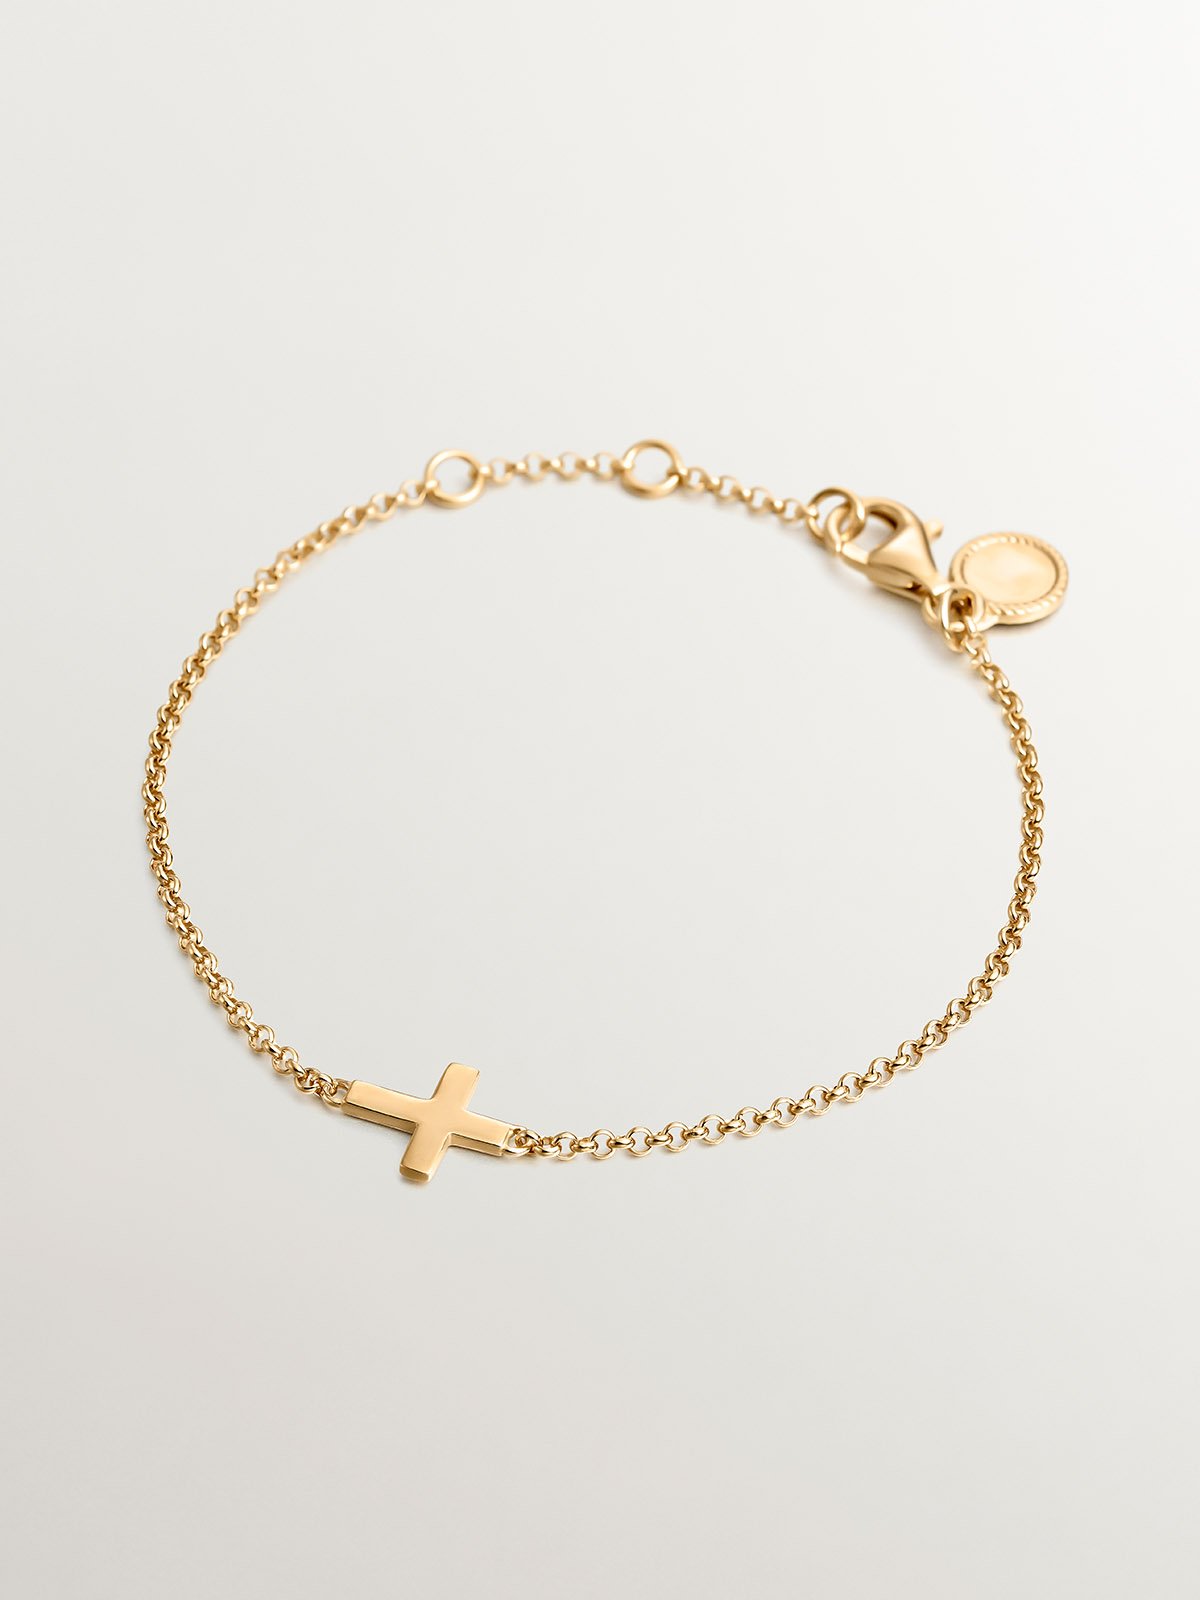 925 Silver bracelet bathed in 18K yellow gold with cross